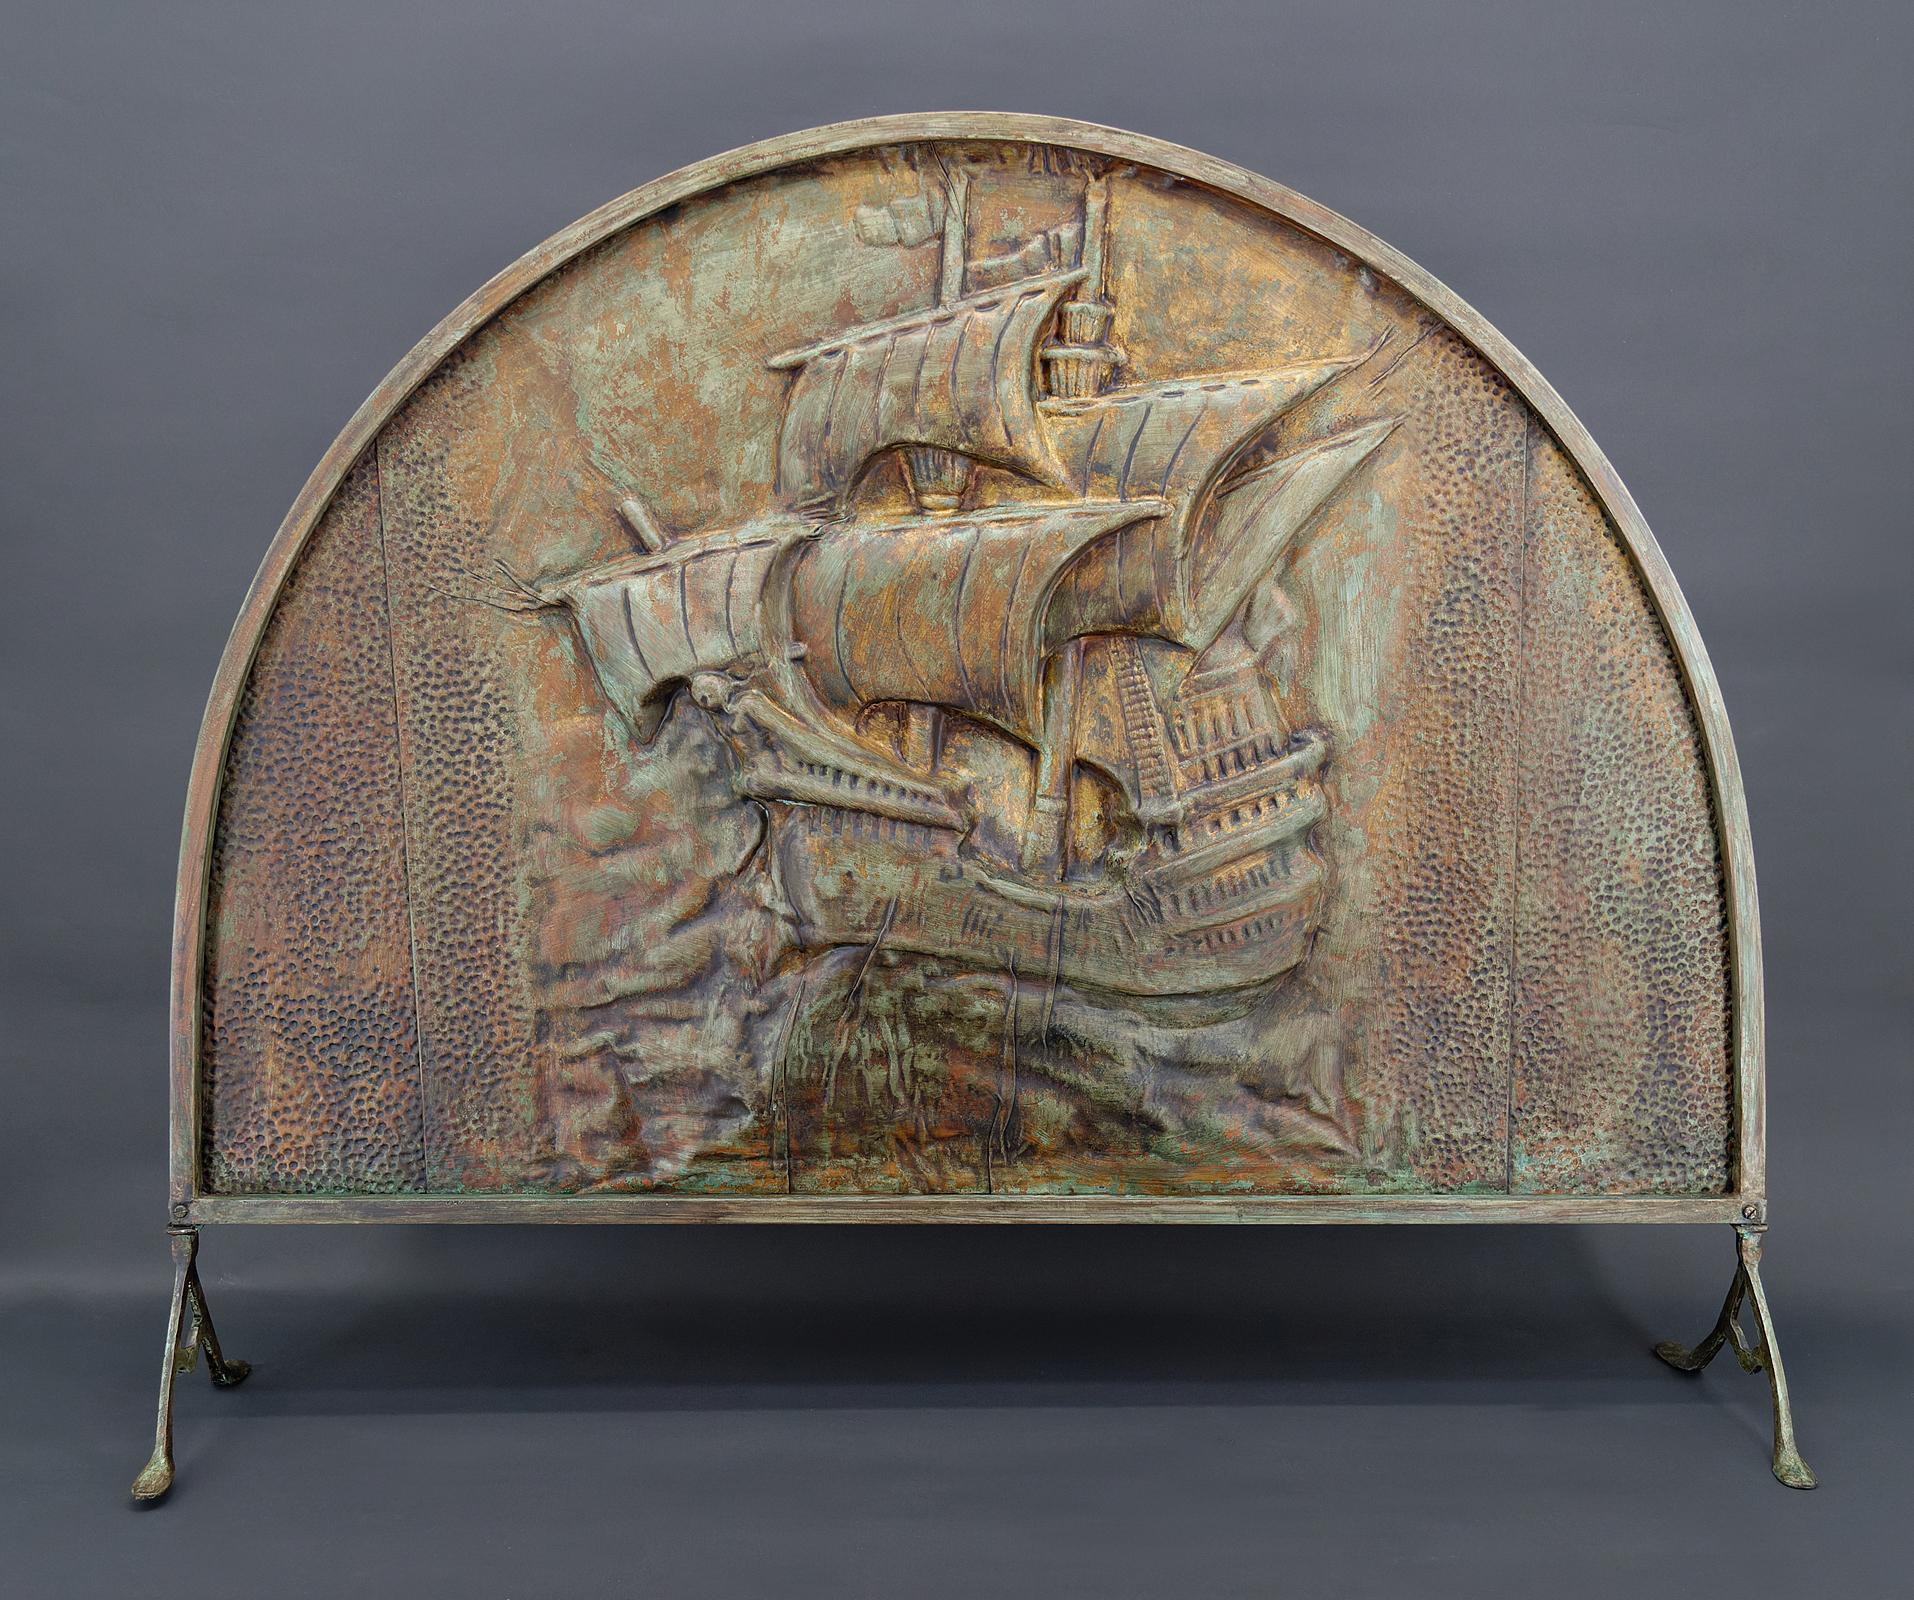 Fire screen / chimney cover, with galleon / boat / ship motif.

Perhaps an artist's vision of a ghost ship: the Flying Dutchman...

In bronze and patinated brass
Art Deco, circa 1920

In good condition, beautiful patina.

Dimensions:
height 66